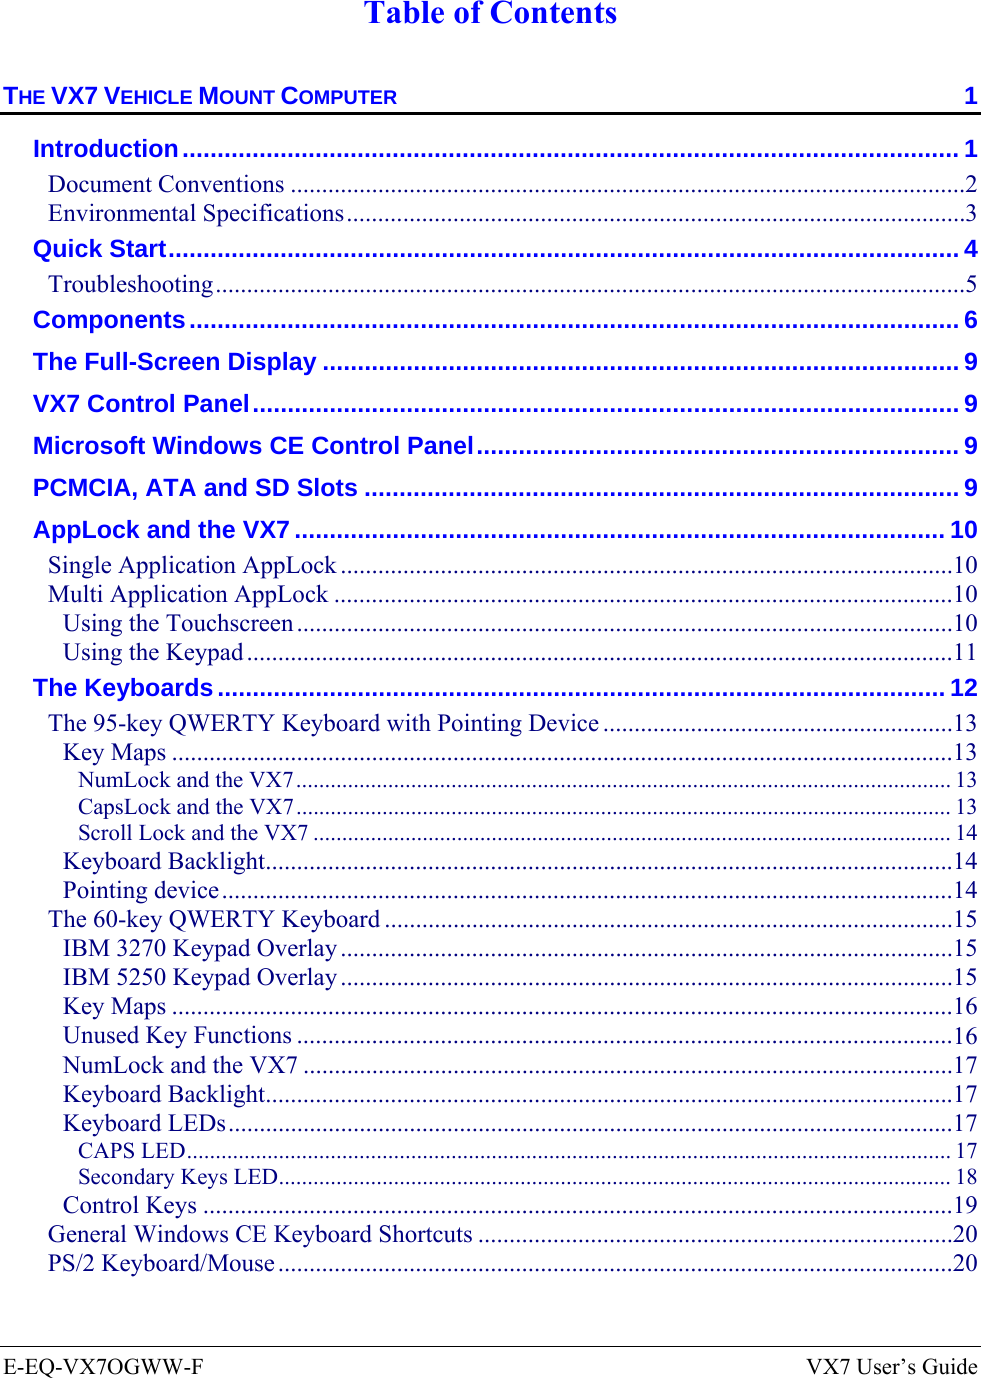  E-EQ-VX7OGWW-F  VX7 User’s Guide  Table of Contents THE VX7 VEHICLE MOUNT COMPUTER  1 Introduction............................................................................................................... 1 Document Conventions ............................................................................................................2 Environmental Specifications...................................................................................................3 Quick Start................................................................................................................. 4 Troubleshooting........................................................................................................................5 Components.............................................................................................................. 6 The Full-Screen Display ........................................................................................... 9 VX7 Control Panel..................................................................................................... 9 Microsoft Windows CE Control Panel..................................................................... 9 PCMCIA, ATA and SD Slots ..................................................................................... 9 AppLock and the VX7............................................................................................. 10 Single Application AppLock ..................................................................................................10 Multi Application AppLock ...................................................................................................10 Using the Touchscreen .........................................................................................................10 Using the Keypad .................................................................................................................11 The Keyboards........................................................................................................ 12 The 95-key QWERTY Keyboard with Pointing Device ........................................................13 Key Maps .............................................................................................................................13 NumLock and the VX7.................................................................................................................. 13 CapsLock and the VX7.................................................................................................................. 13 Scroll Lock and the VX7 ............................................................................................................... 14 Keyboard Backlight..............................................................................................................14 Pointing device.....................................................................................................................14 The 60-key QWERTY Keyboard ...........................................................................................15 IBM 3270 Keypad Overlay ..................................................................................................15 IBM 5250 Keypad Overlay ..................................................................................................15 Key Maps .............................................................................................................................16 Unused Key Functions .........................................................................................................16 NumLock and the VX7 ........................................................................................................17 Keyboard Backlight..............................................................................................................17 Keyboard LEDs....................................................................................................................17 CAPS LED..................................................................................................................................... 17 Secondary Keys LED..................................................................................................................... 18 Control Keys ........................................................................................................................19 General Windows CE Keyboard Shortcuts ............................................................................20 PS/2 Keyboard/Mouse............................................................................................................20 